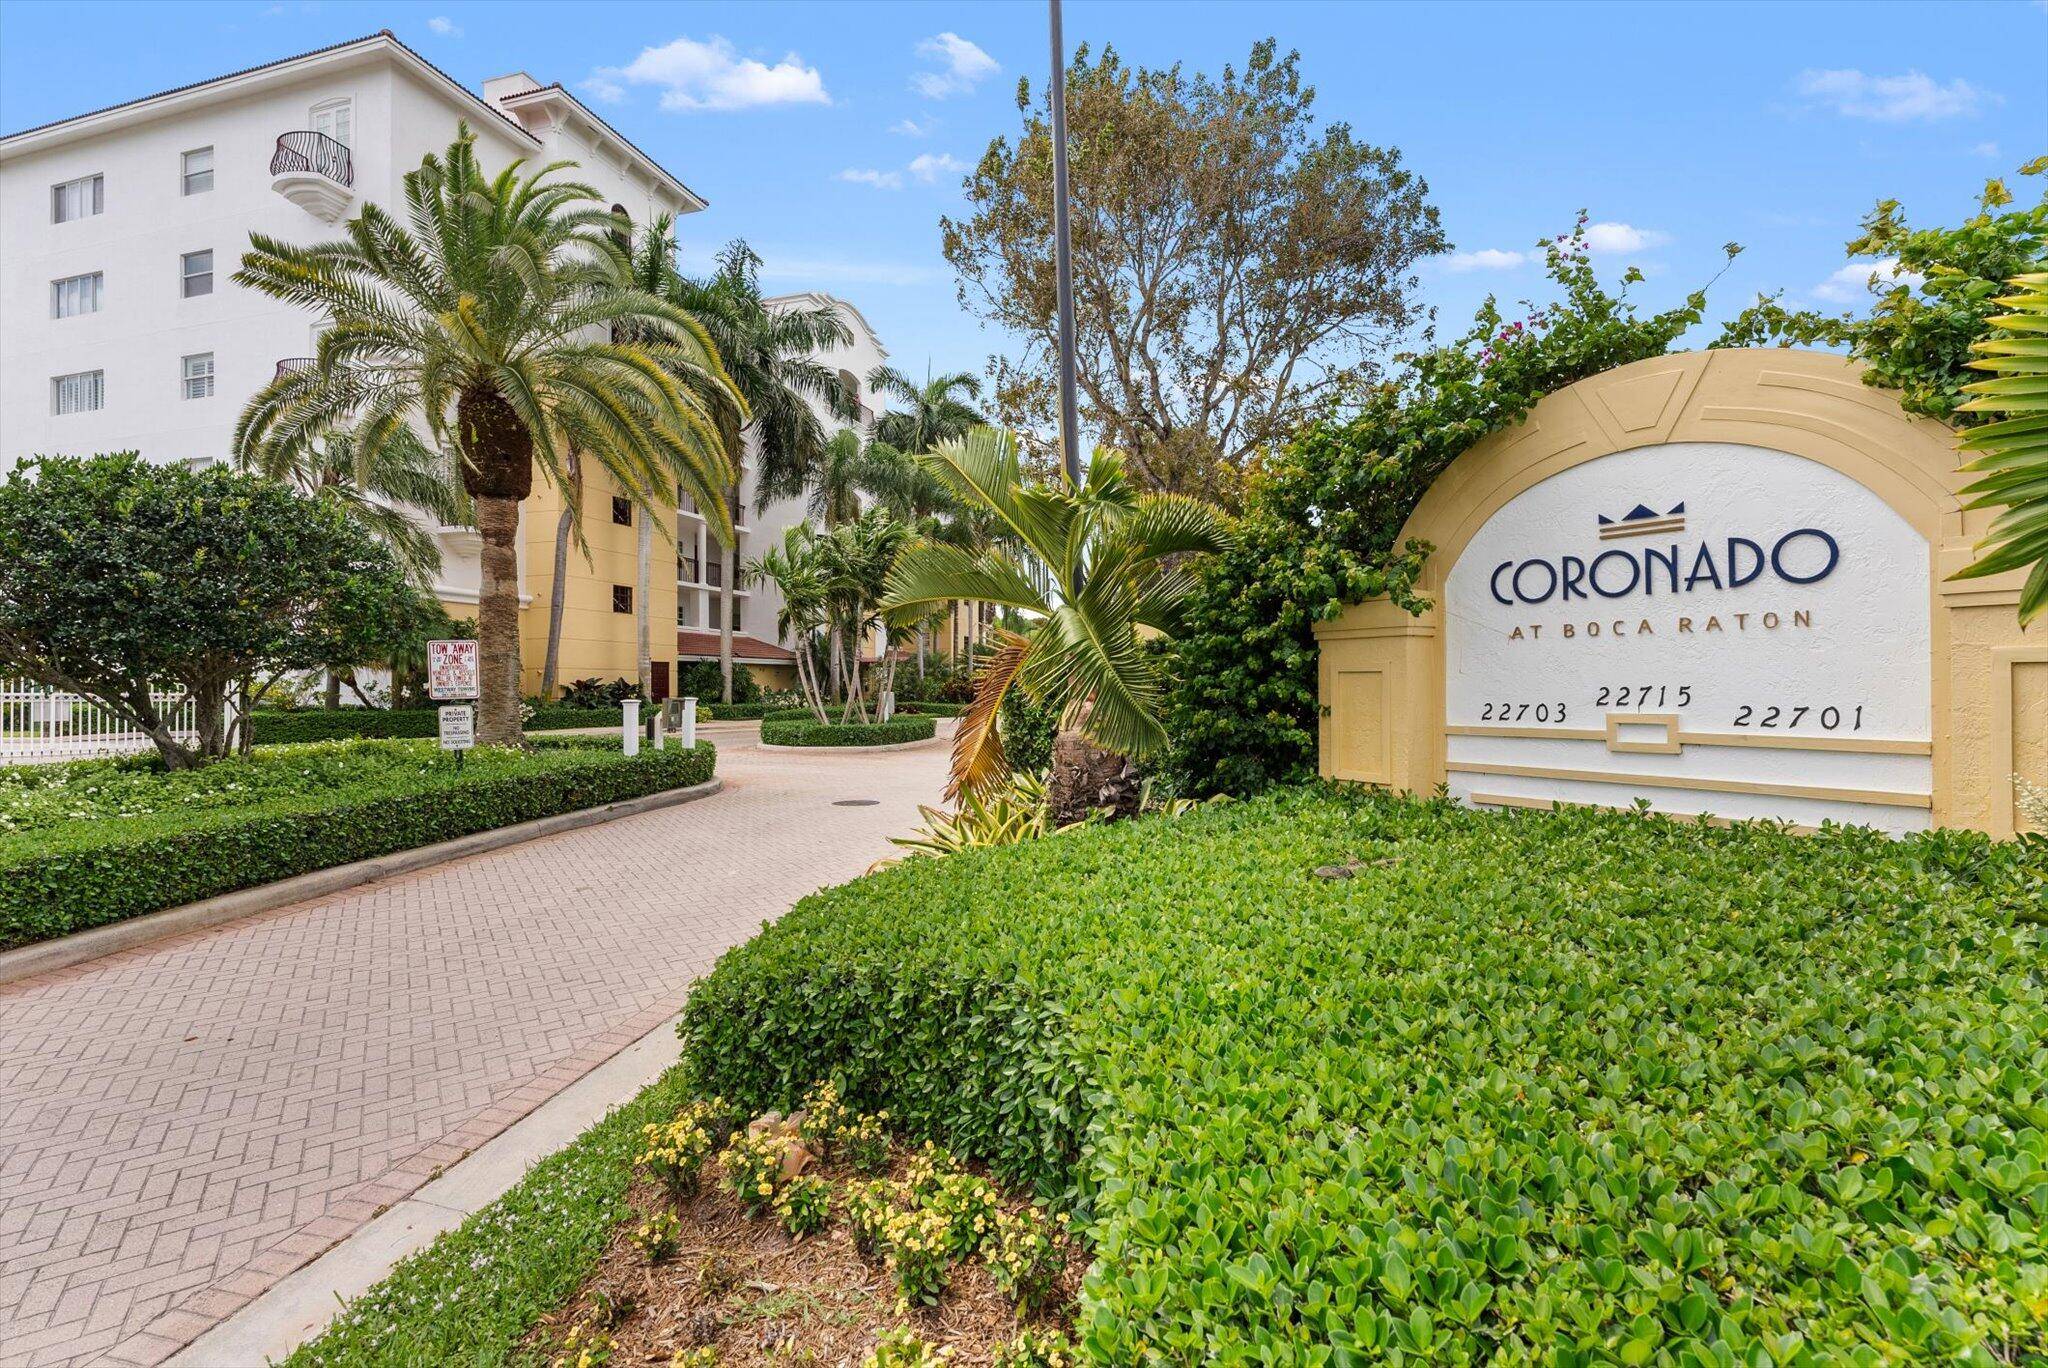 Enjoy expansive stunning 5th floor views of pool in this bright and sunny residence with hurricane impact windows, 9' ceilings, and elegant crown molding.